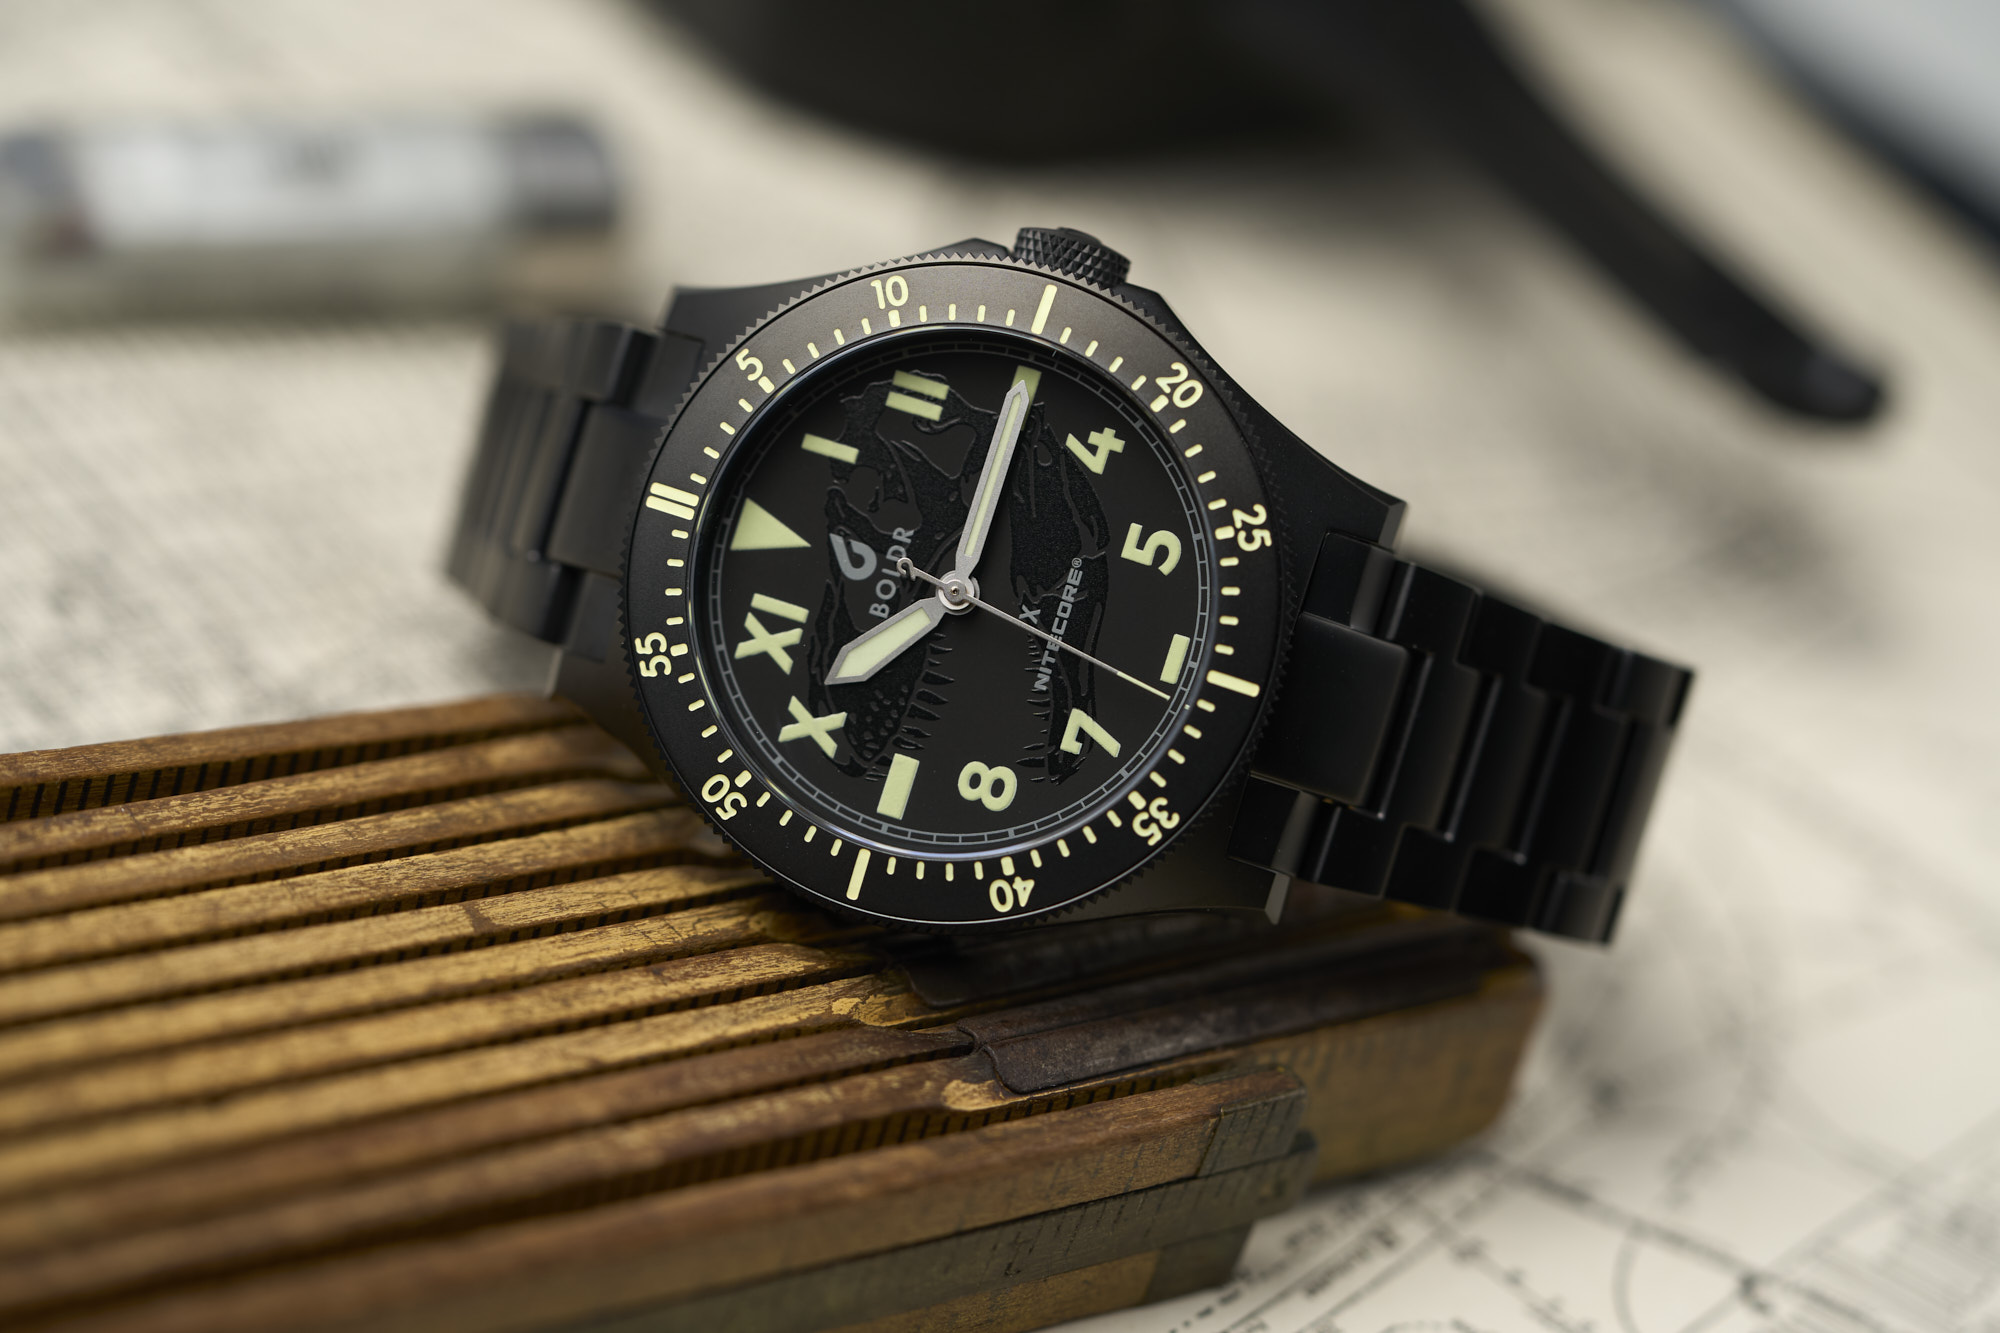 BOLDR Expedition PVD – Diver's Watches Facebook Group